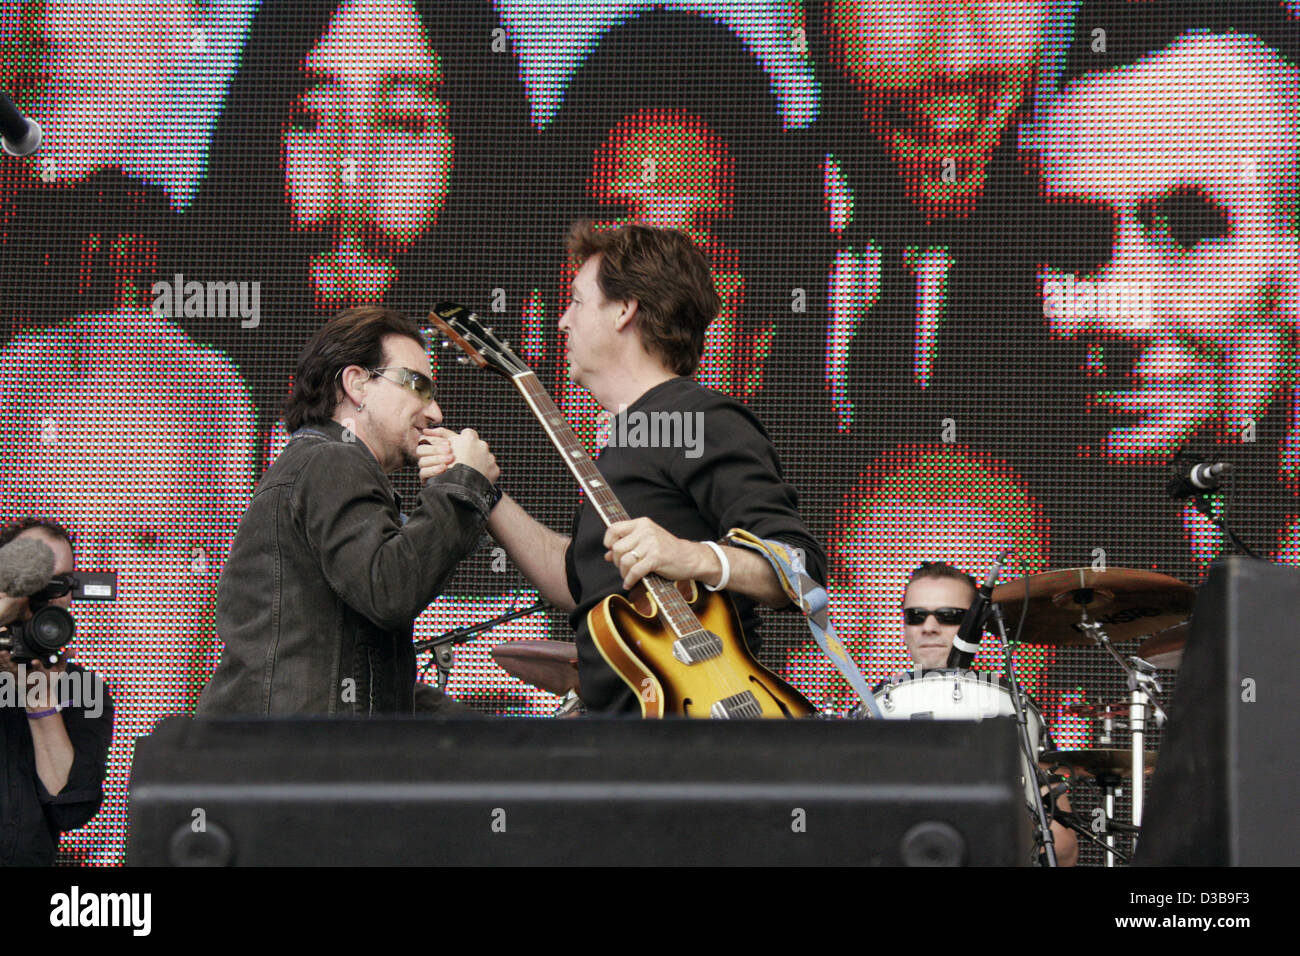 (dpa) - Bono (L) of the British rock band U2 and Paul McCartney perform during the Live 8 Concert in Hyde Park in London, England, 2 July 2005. The concert, held simultaneously in many cities around the world including Paris, Berlin, Philadelphia and Rome, aims to call attention to world poverty in  Stock Photo